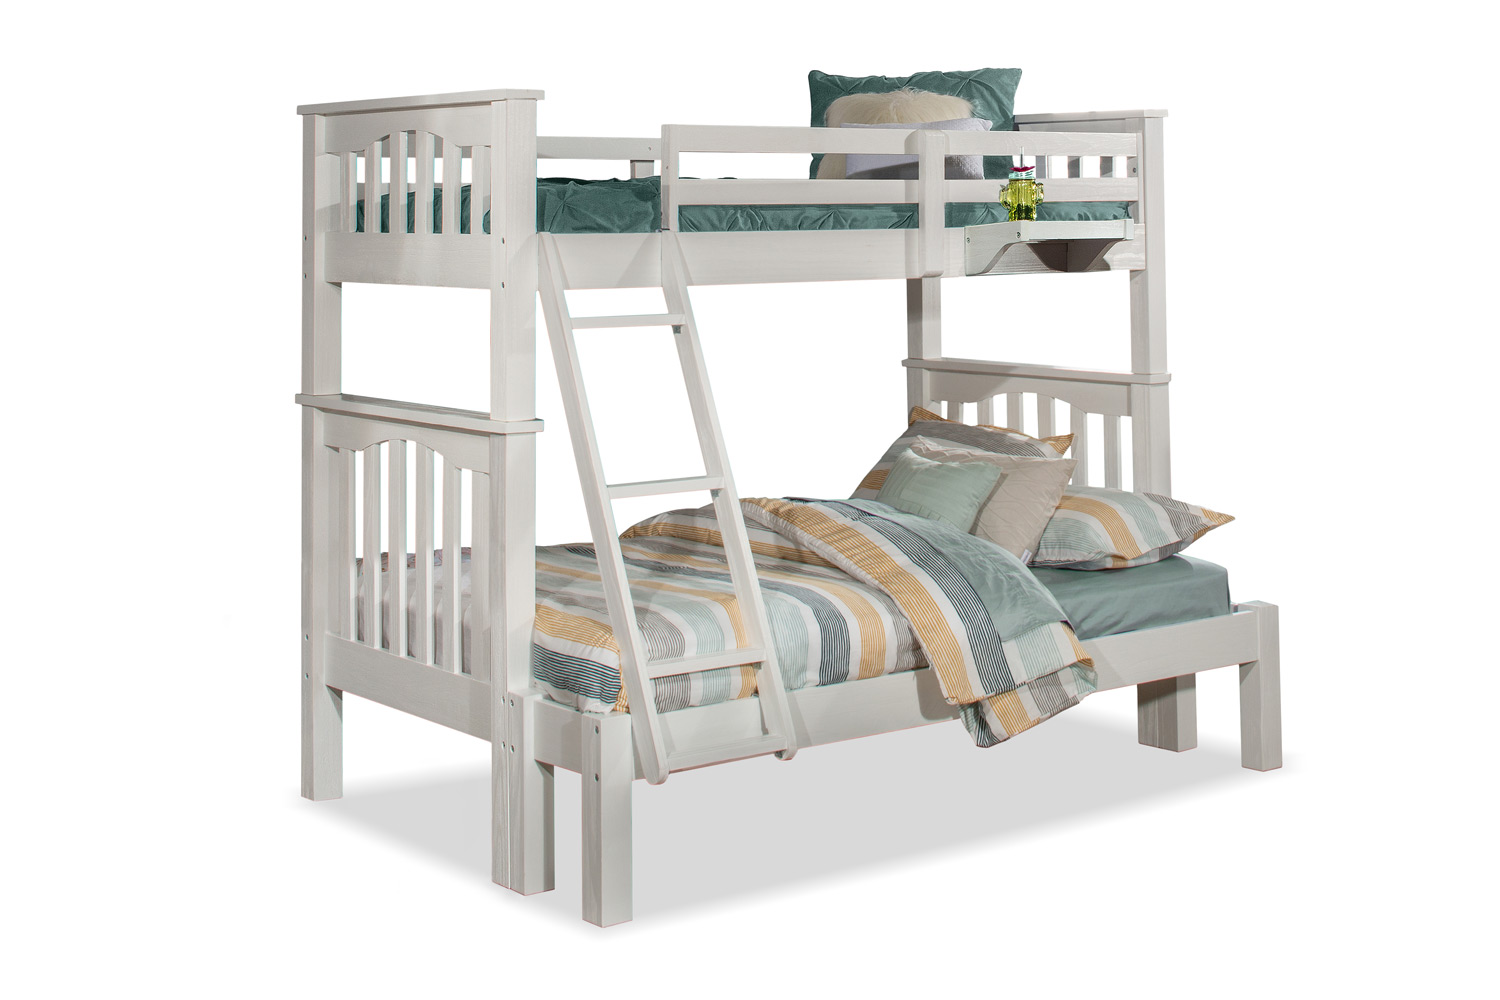 NE Kids Highlands Harper Twin/Full Bunk Bed and Hanging Nightstand - White Finish